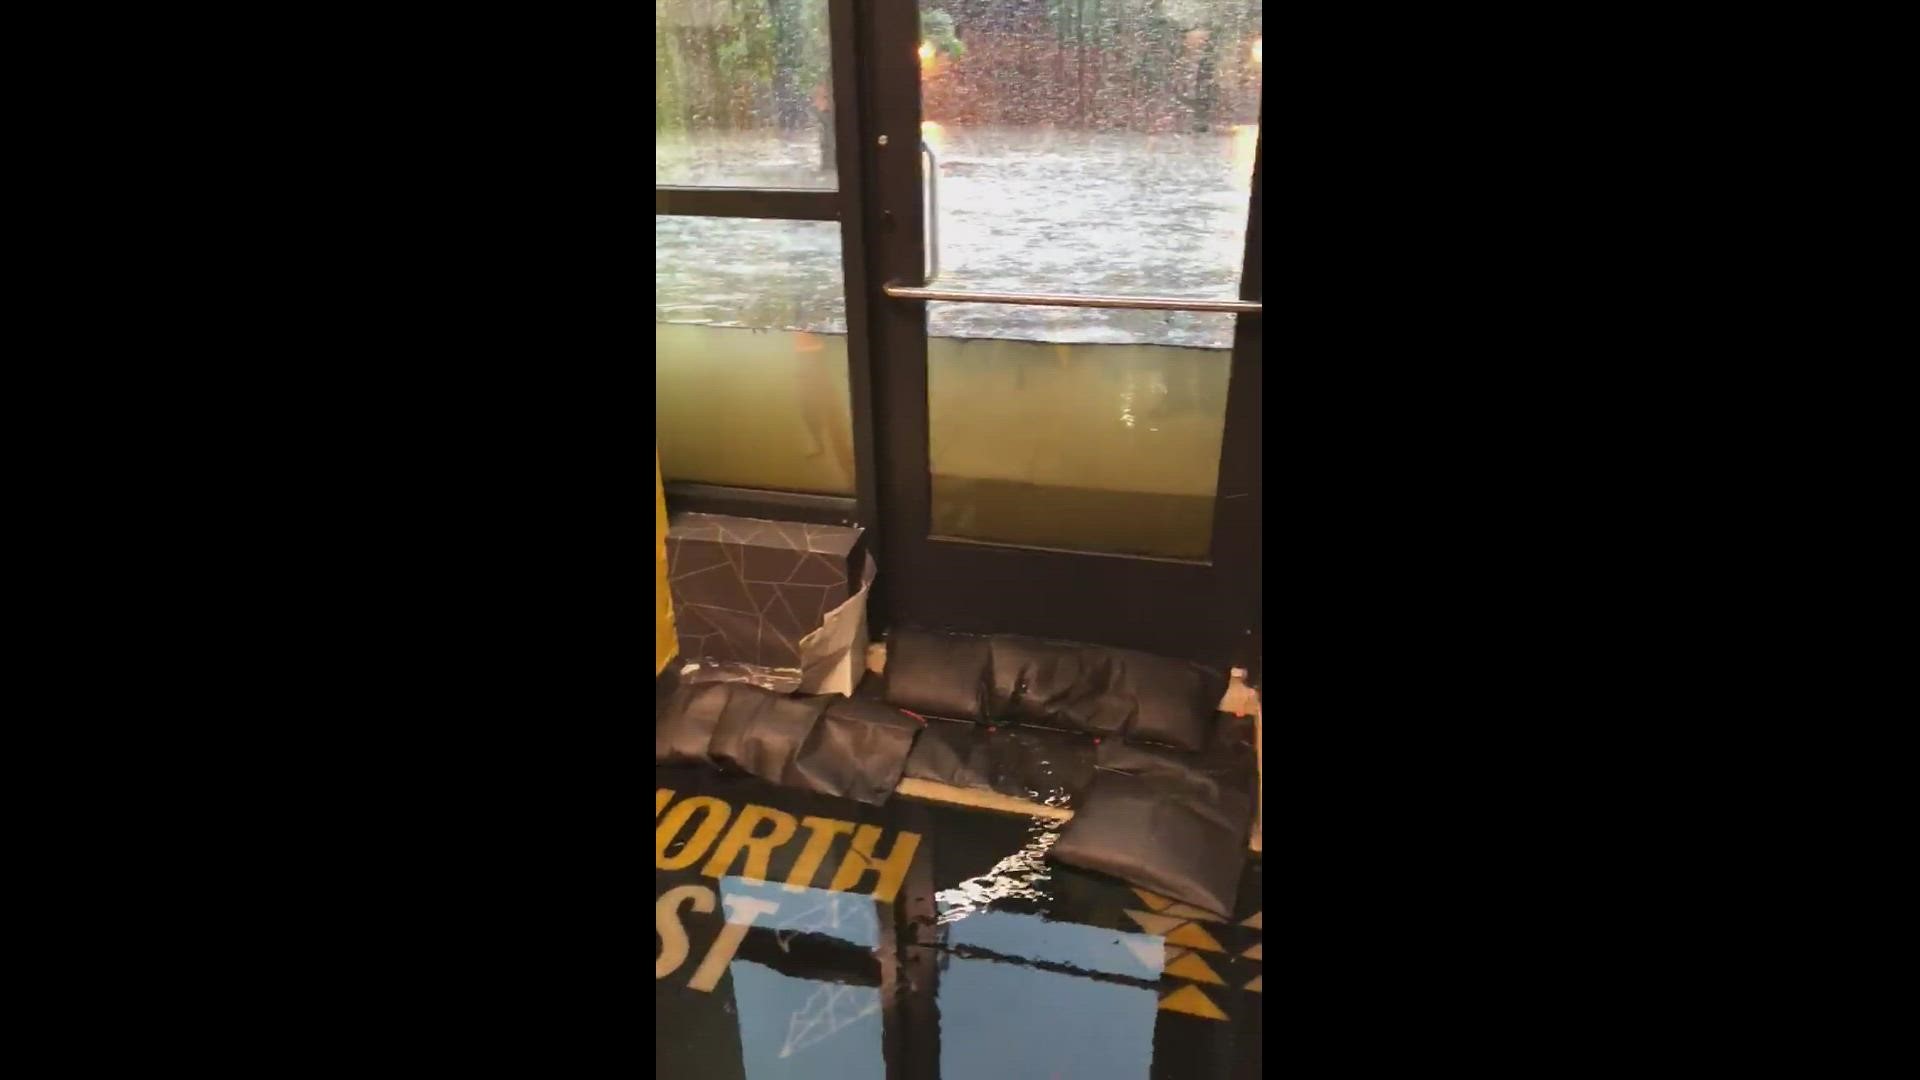 DC-based pet care company "District Dogs" records flooding at their facility. CREDIT: @jacobhensley